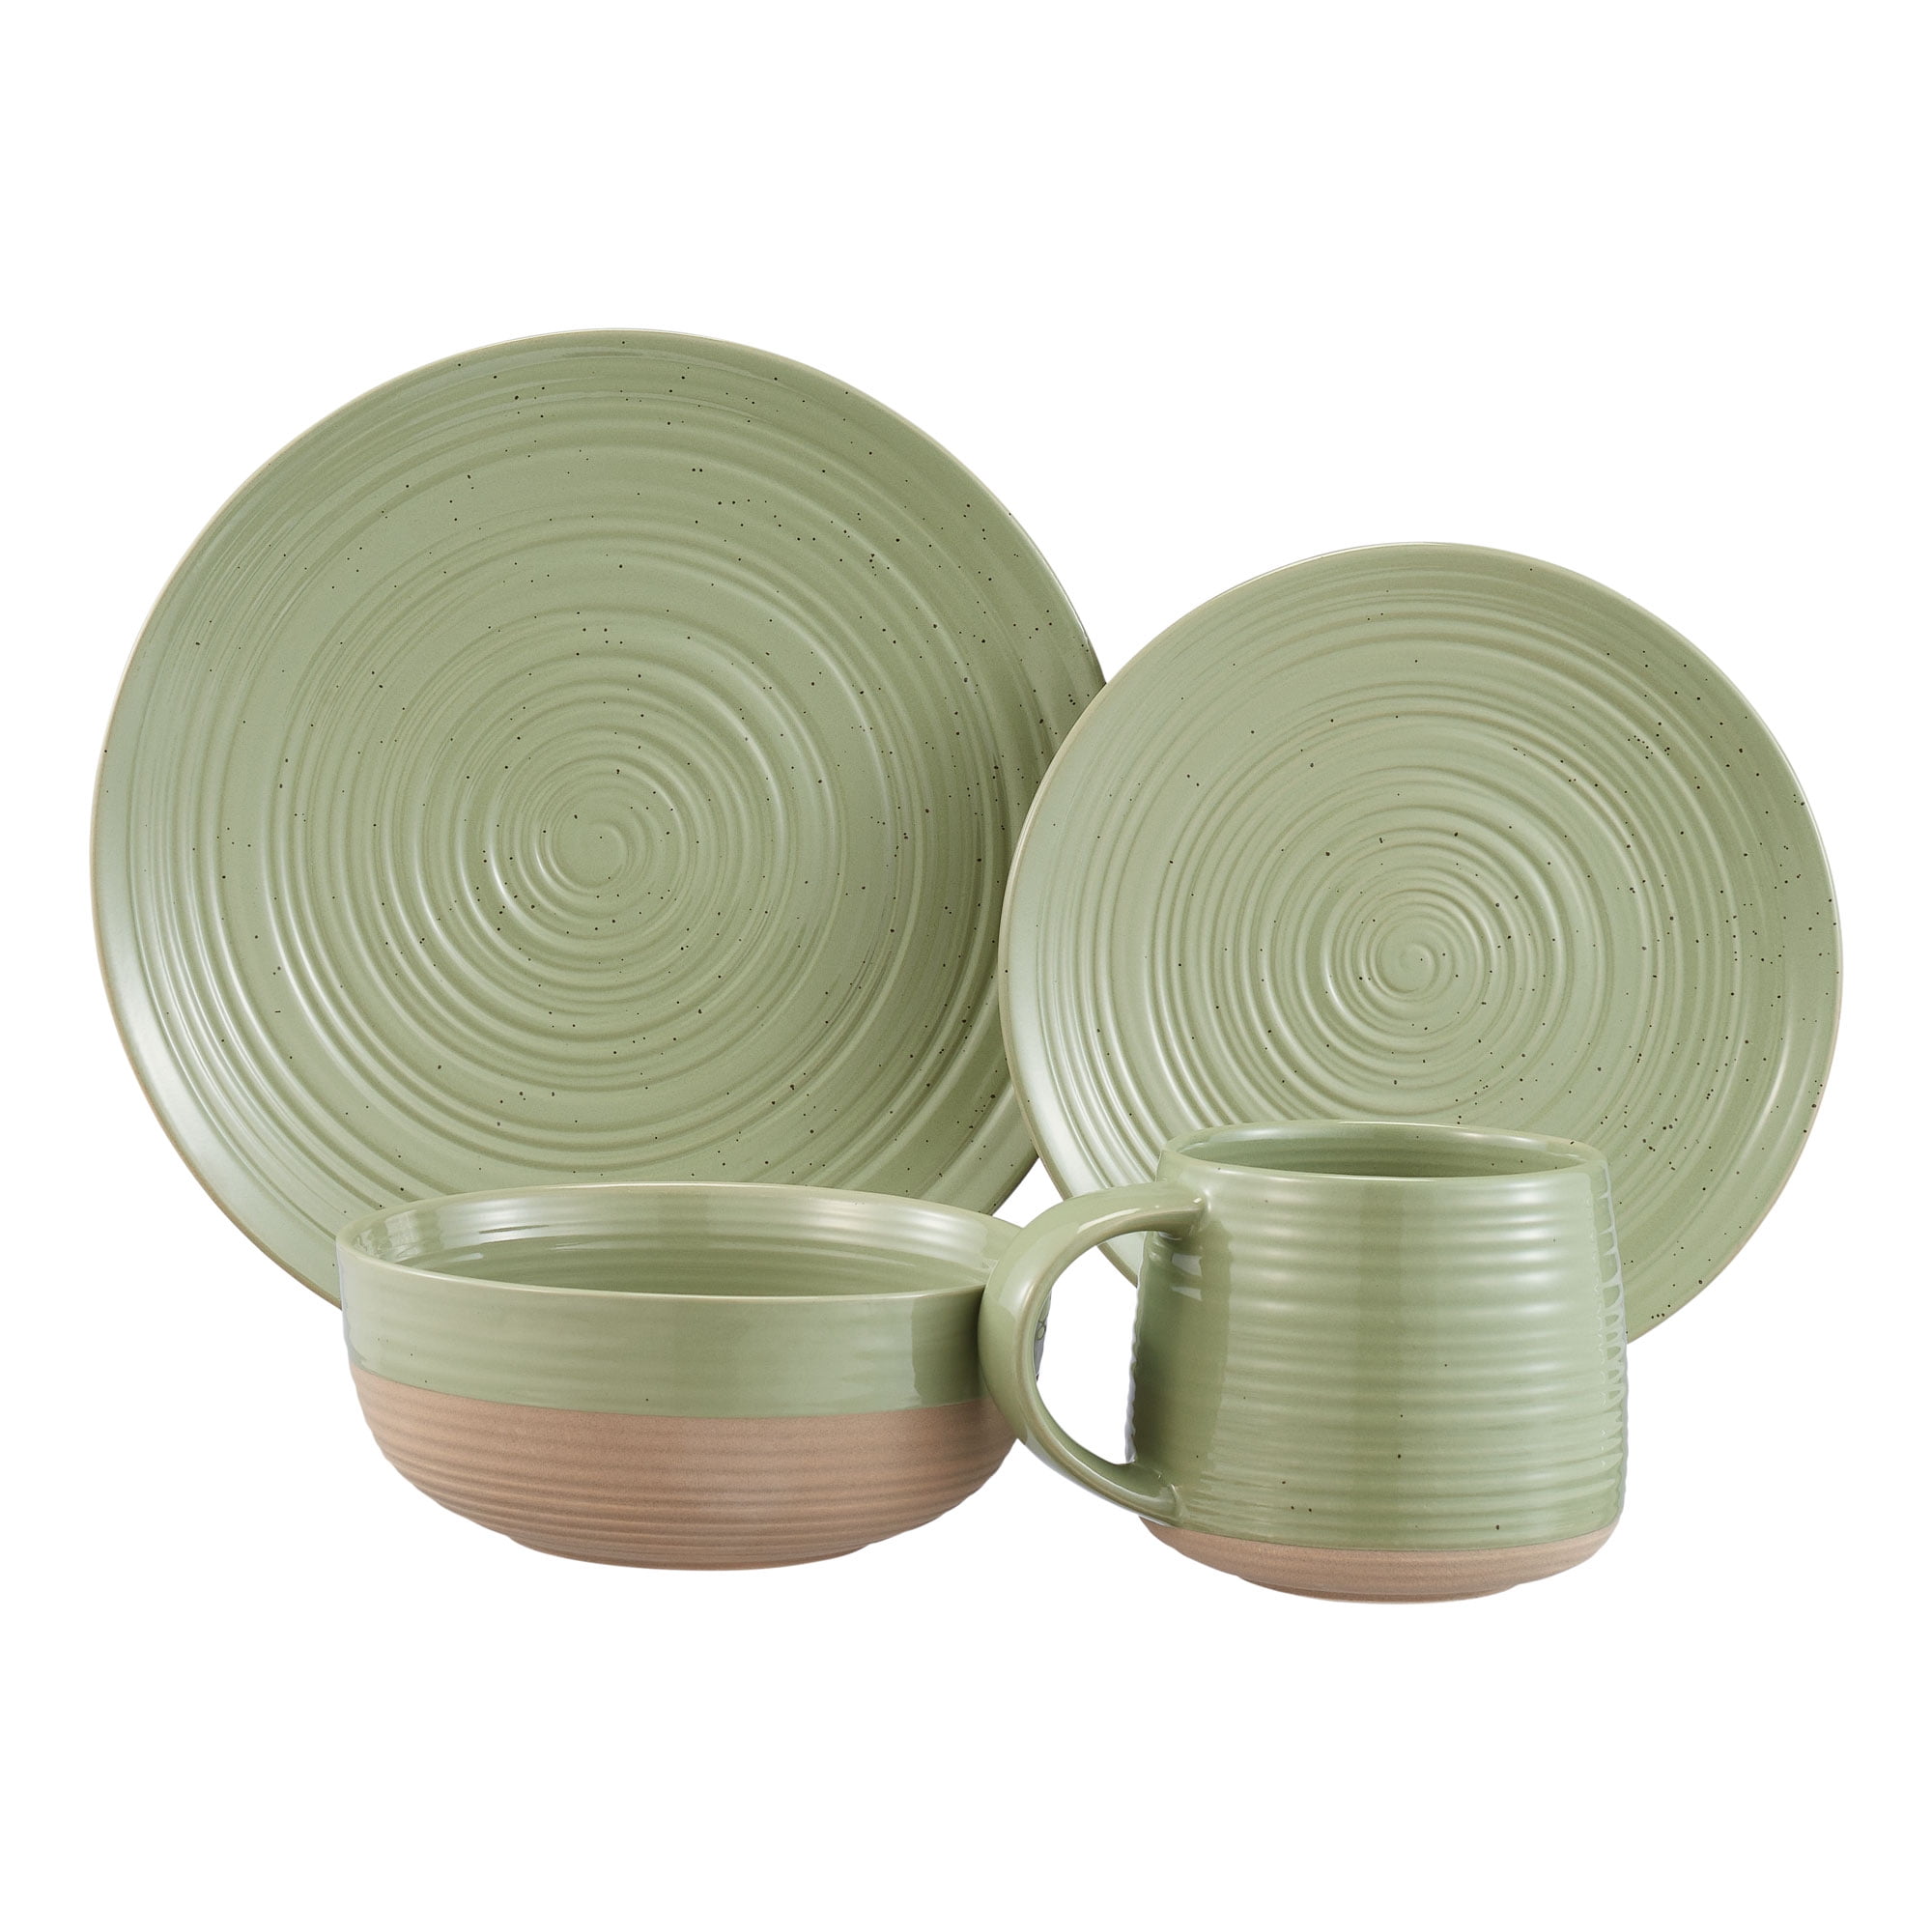 Playmobil dishes-set of 2 plates & 2 cups light green 1457 